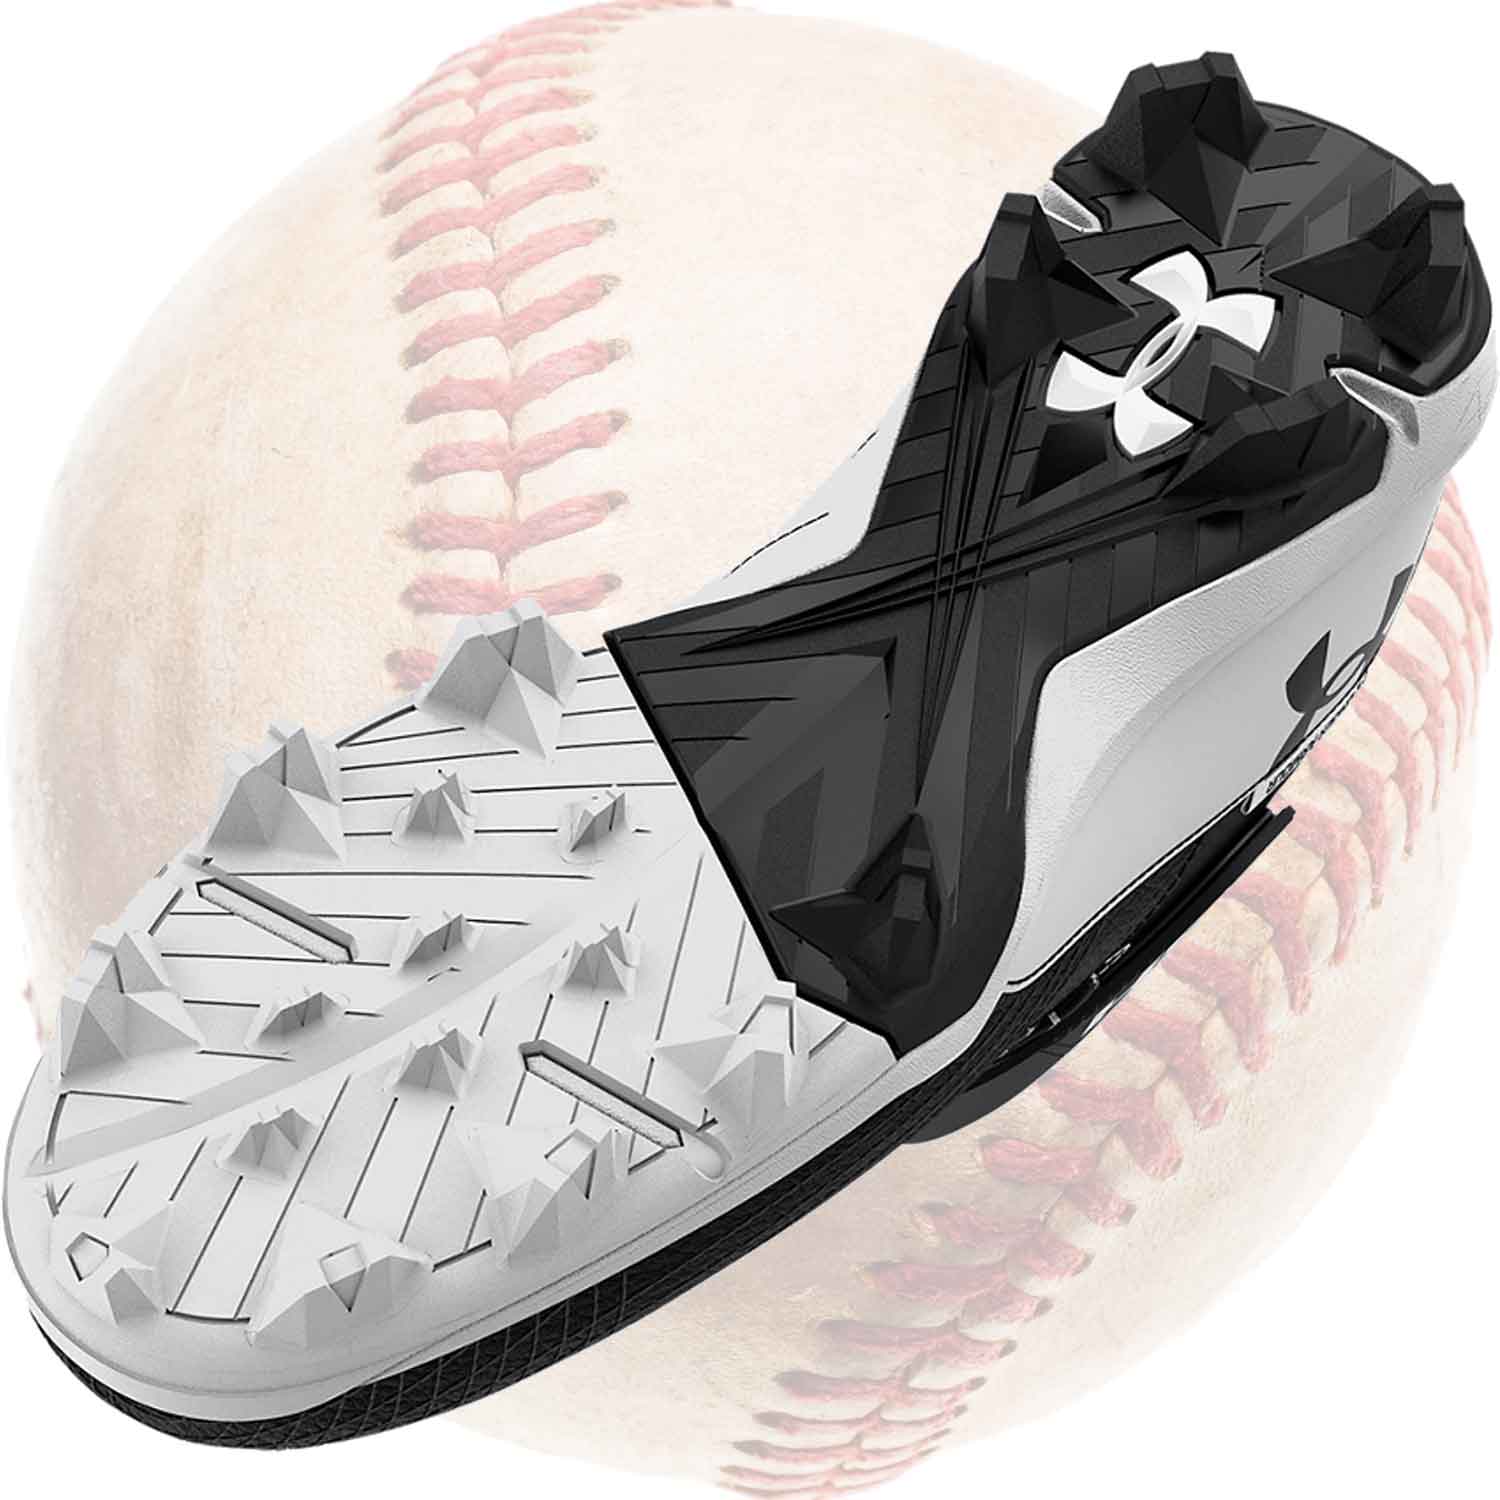 Under Armour Bryce Harper 7 Baseball Shoes - Molded Rubber Cleats